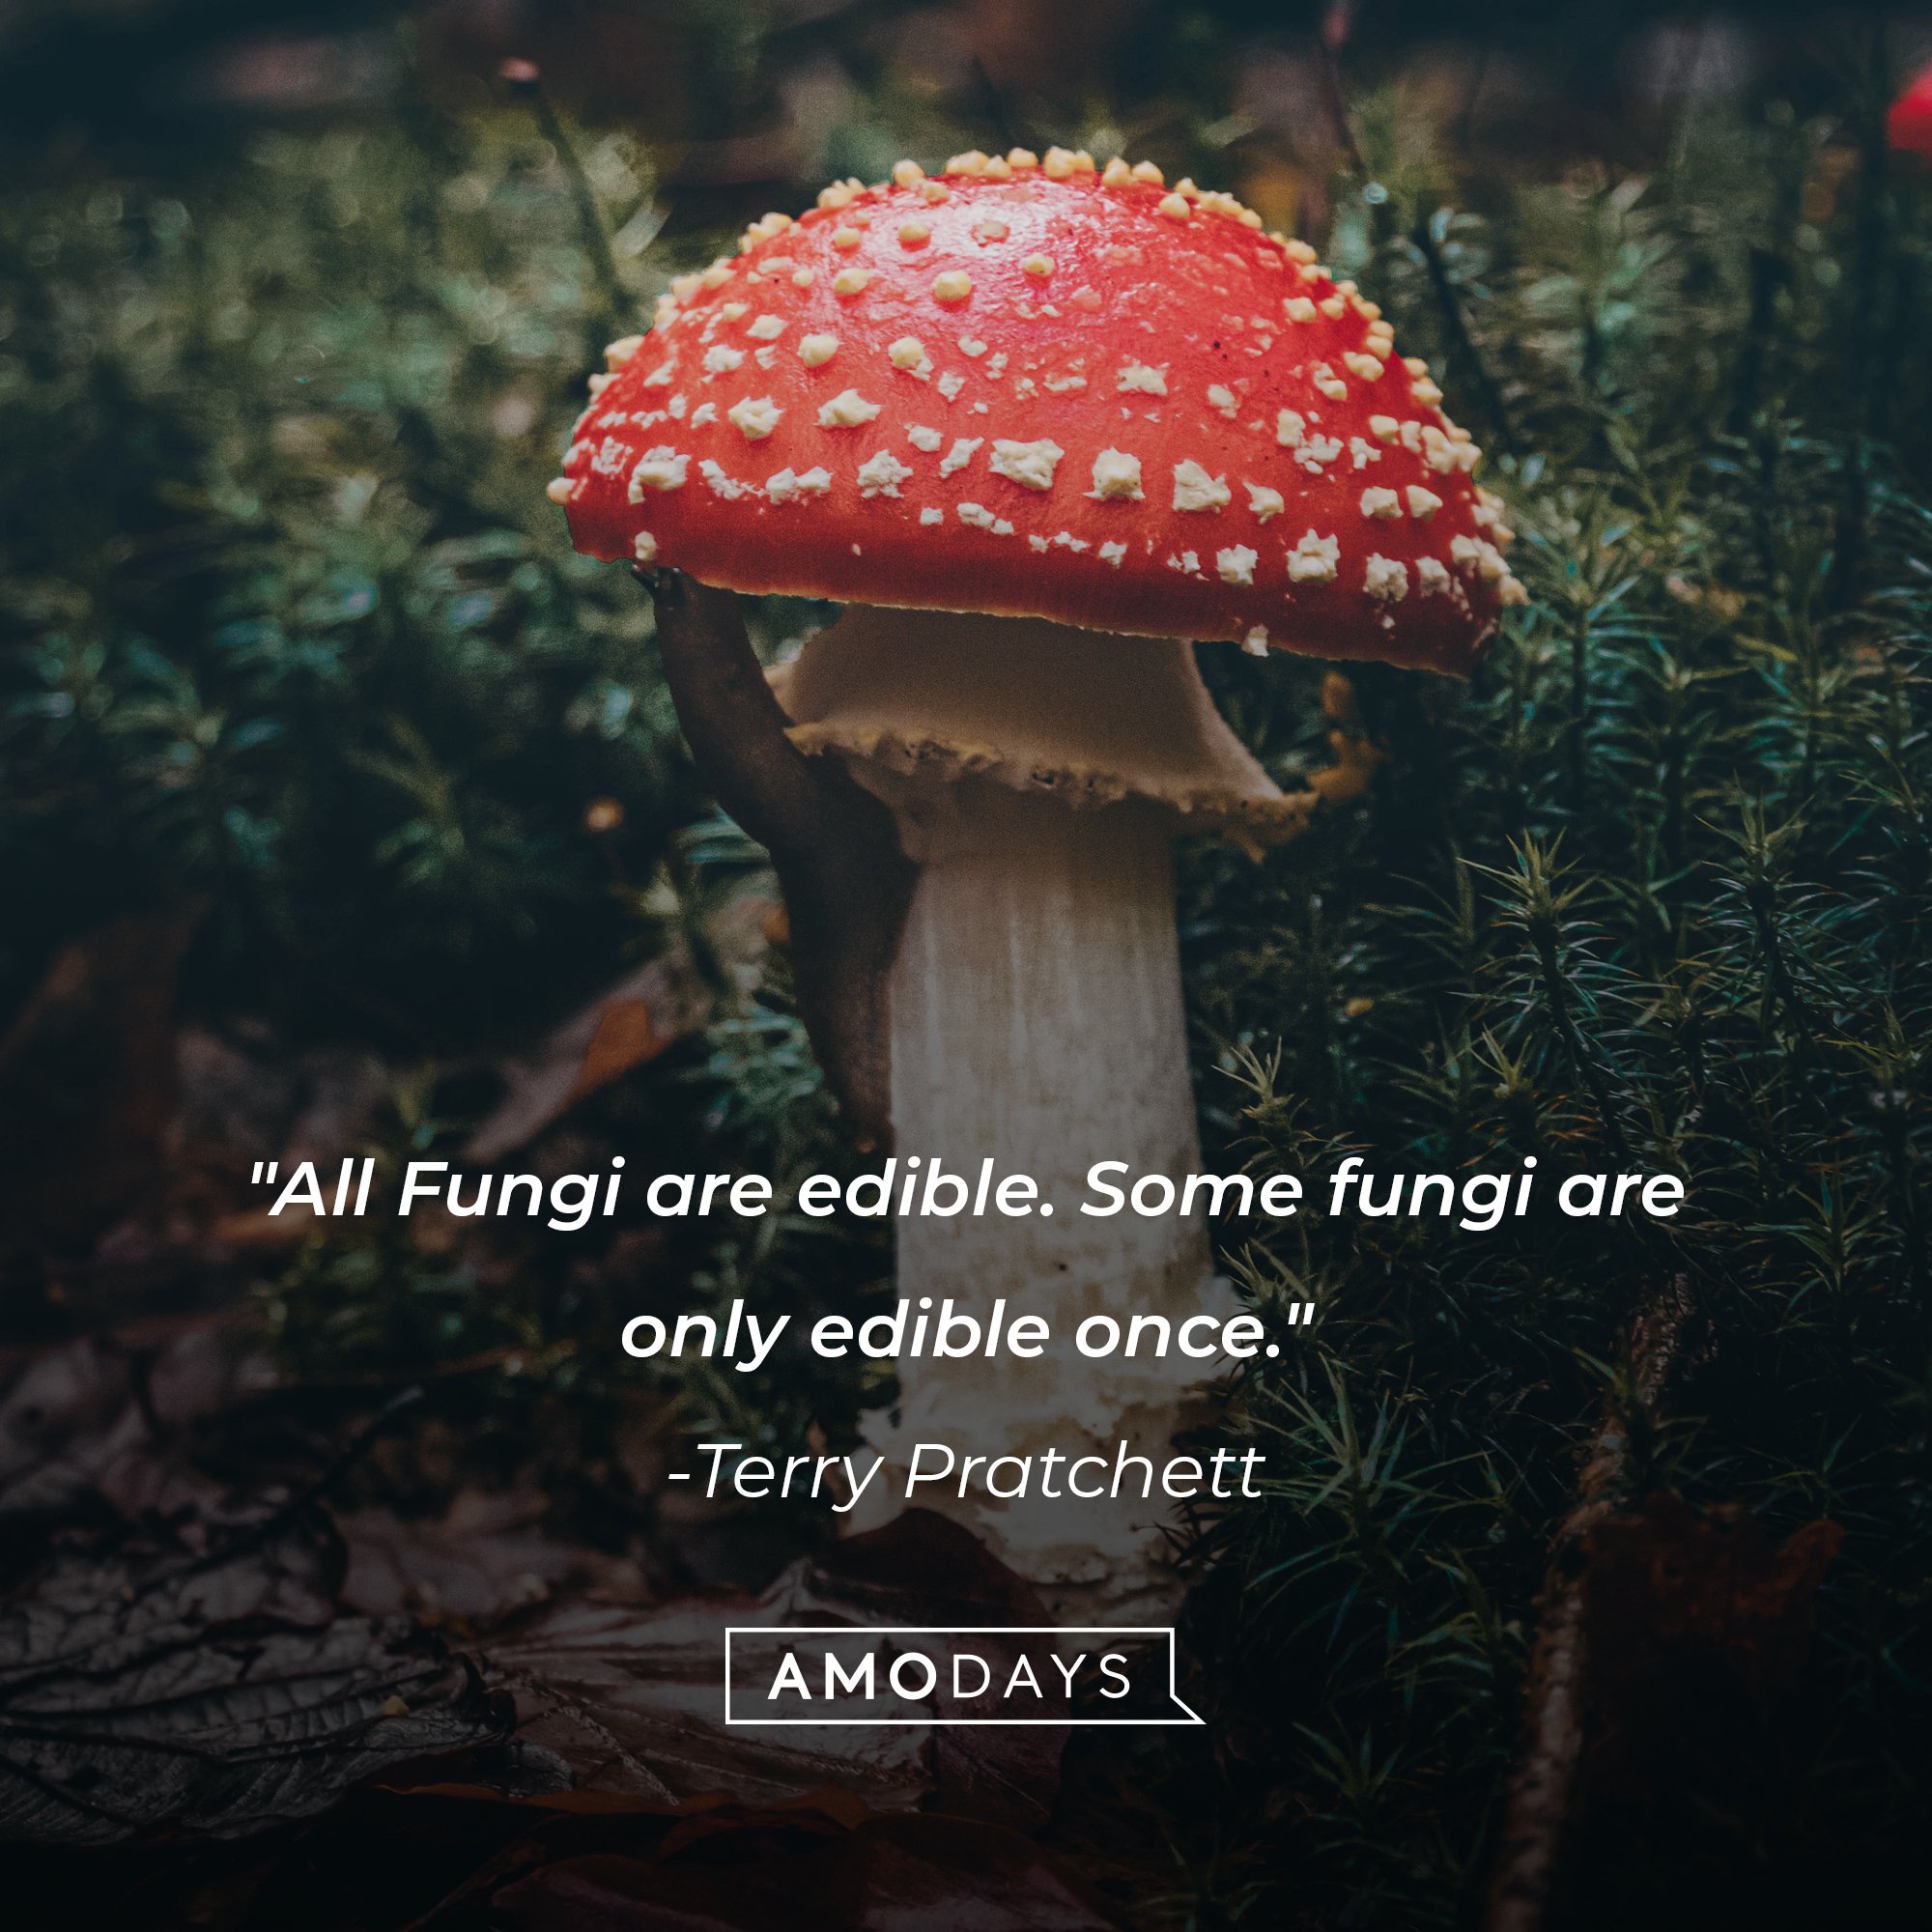 Terry Pratchett’s quote: "All Fungi are edible. Some fungi are only edible once." | Image: AmoDays